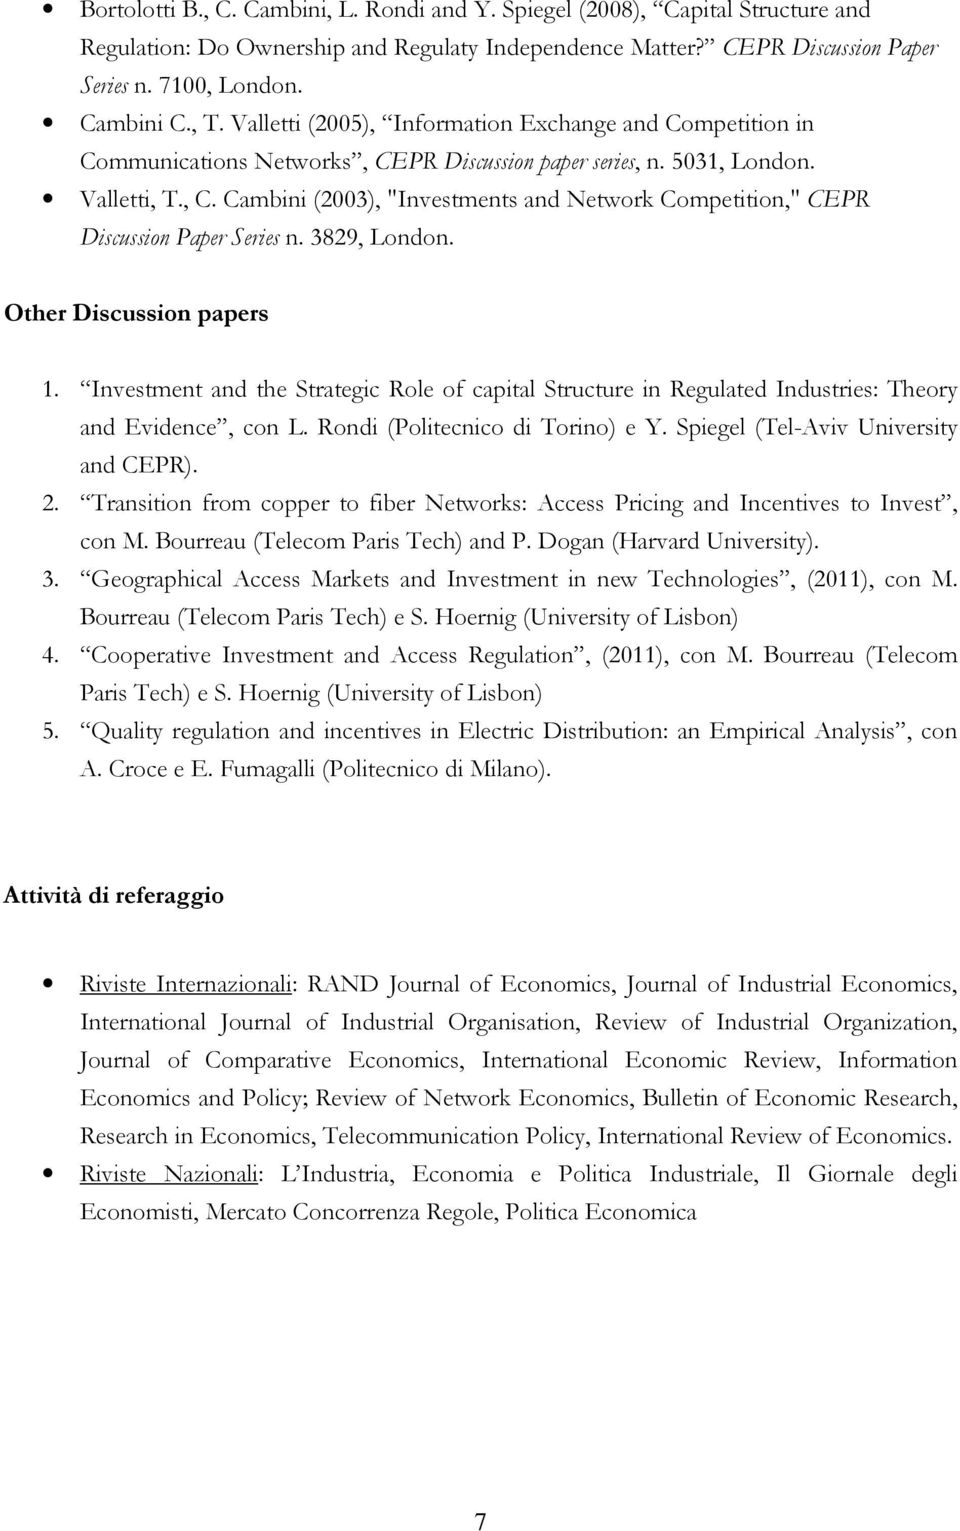 3829, London. Other Discussion papers 1. Investment and the Strategic Role of capital Structure in Regulated Industries: Theory and Evidence, con L. Rondi (Politecnico di Torino) e Y.